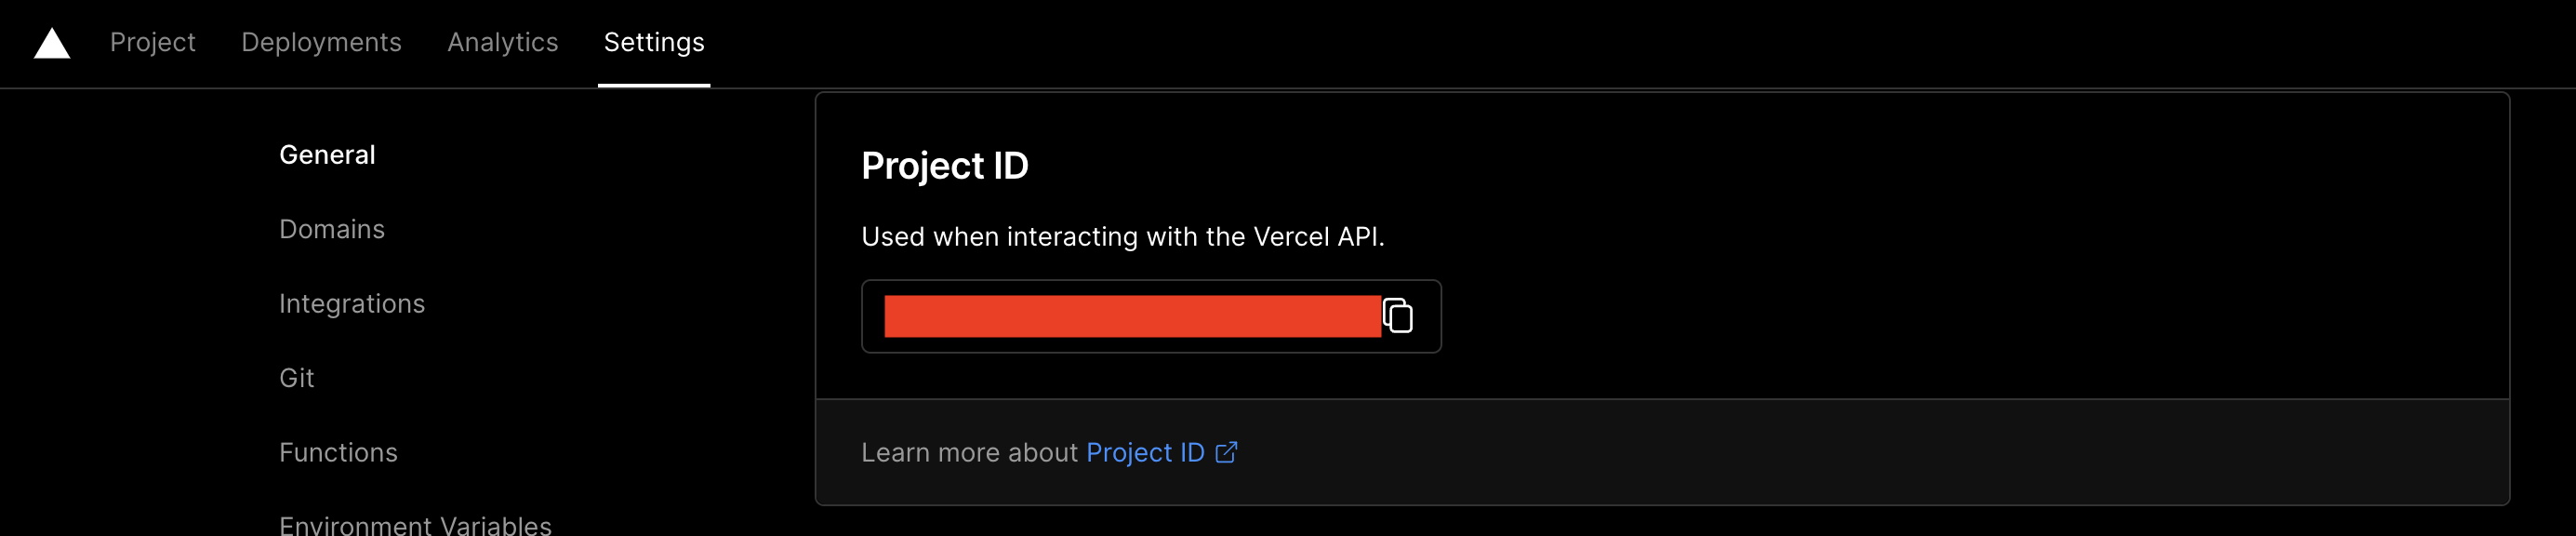 vercel-project-id.png